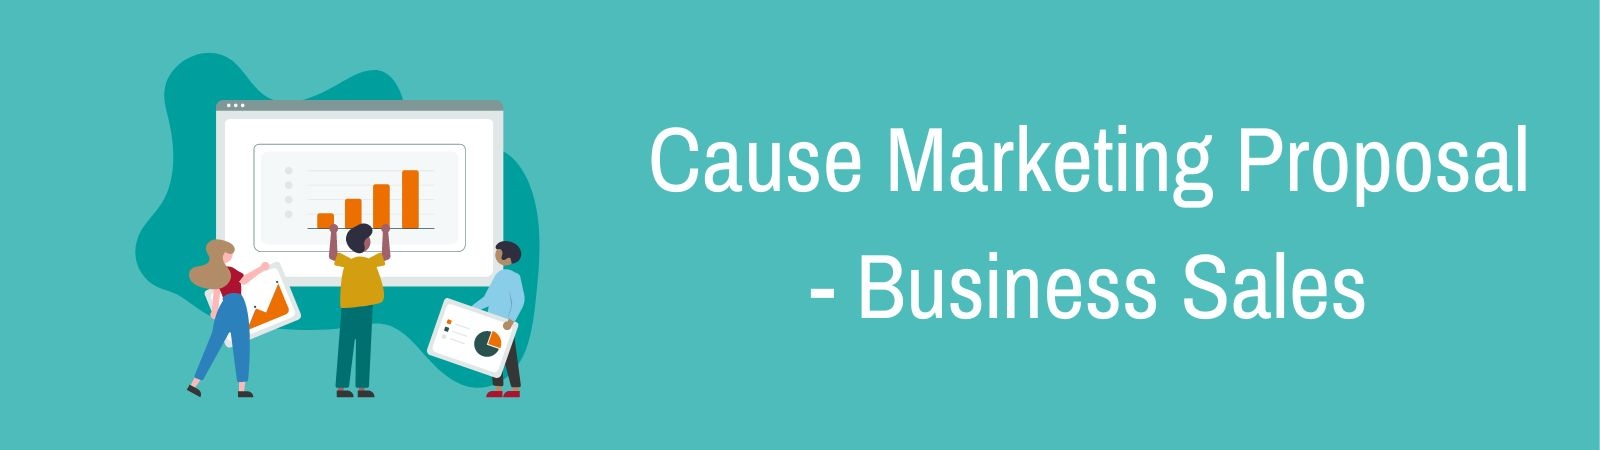 Cause Marketing Proposal - Business Sales